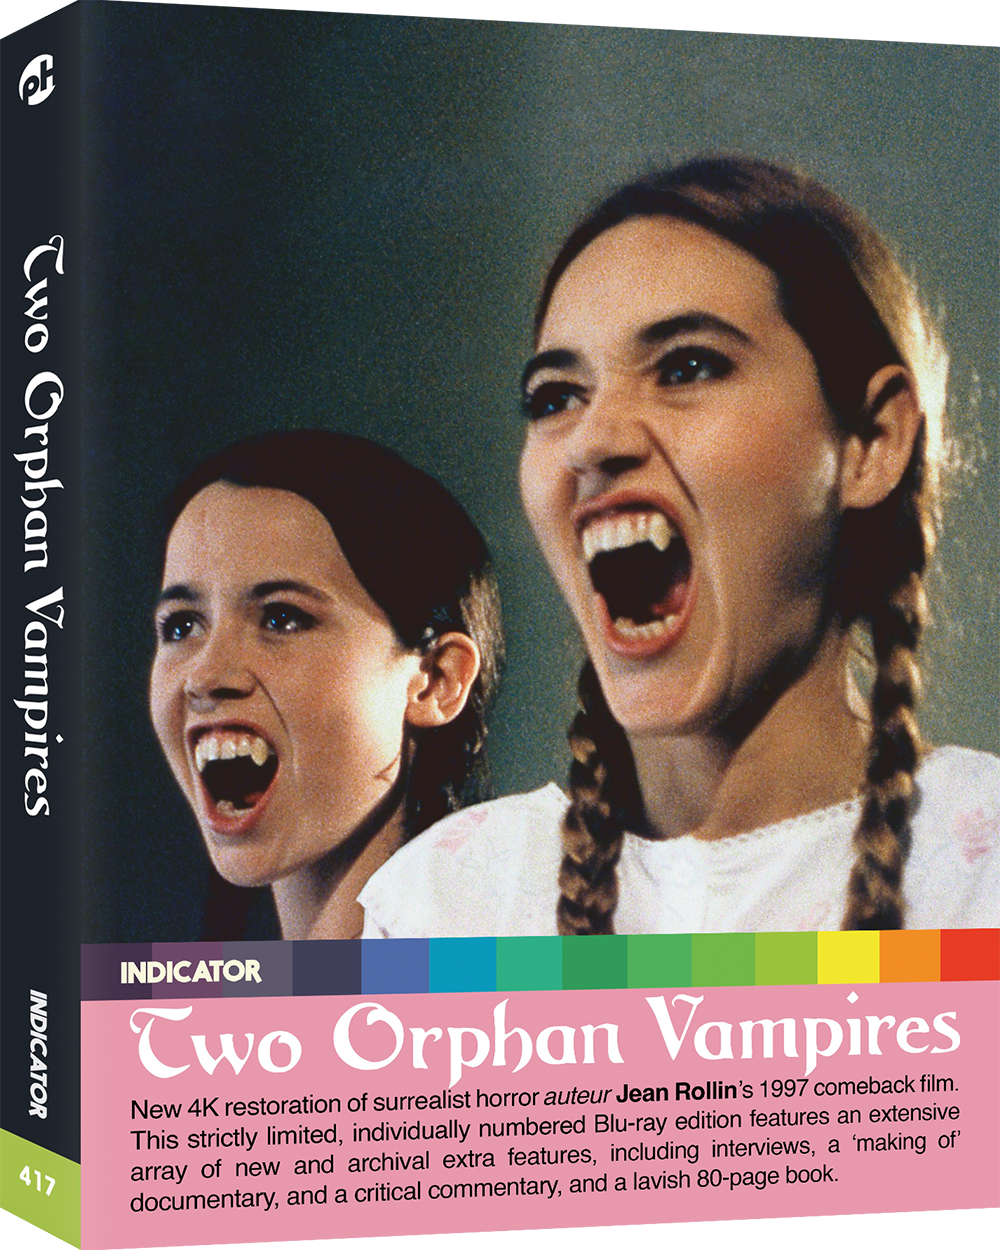 TWO ORPHAN VAMPIRES - Blu-ray LE